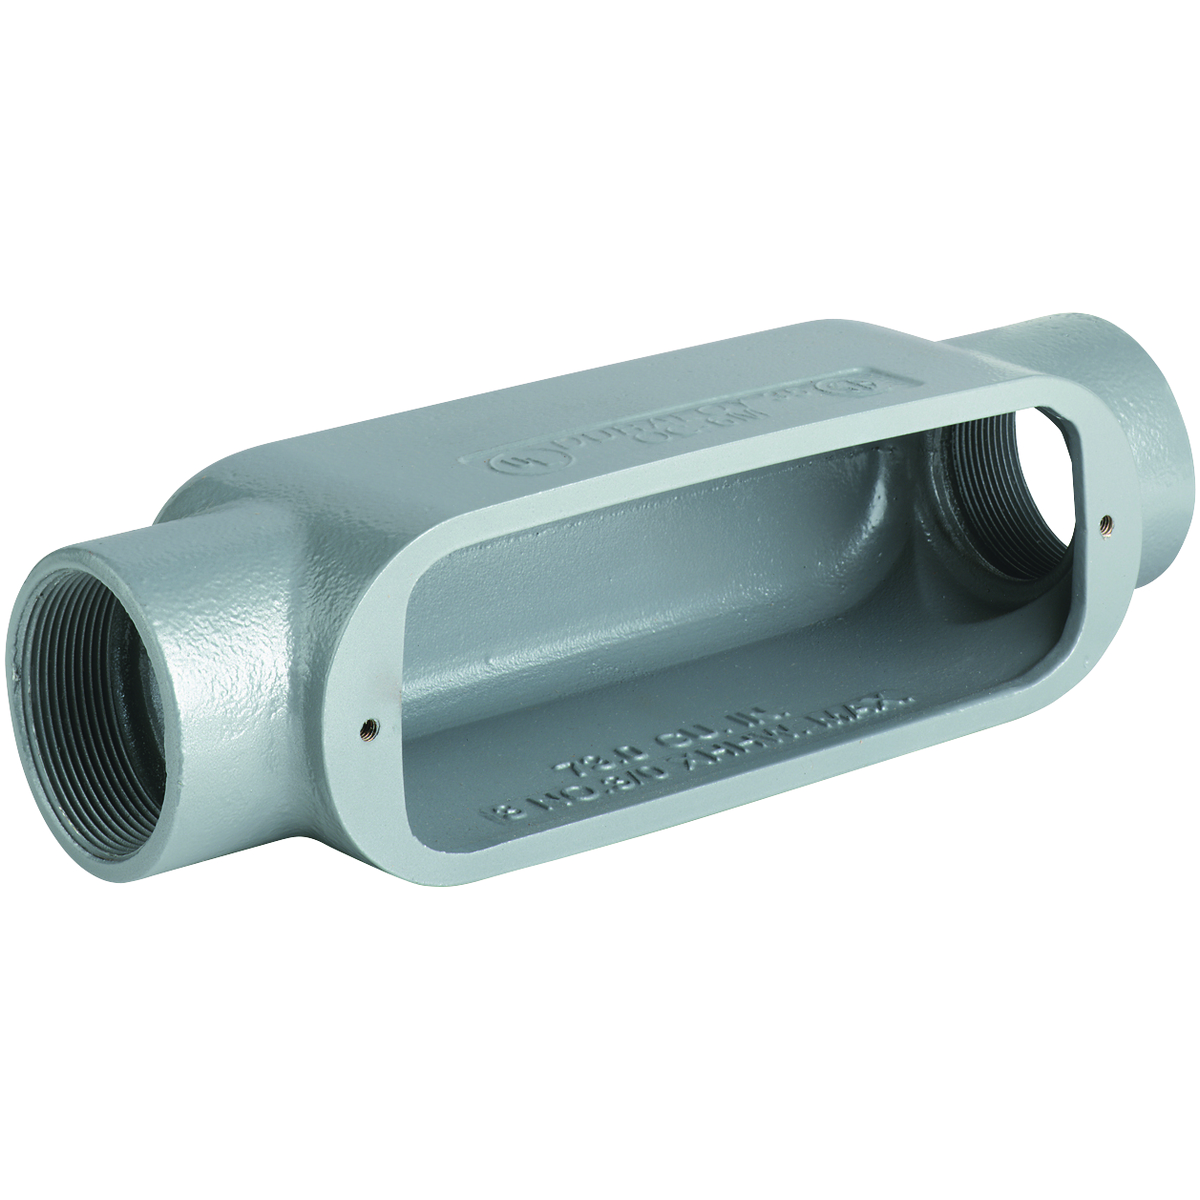 O SERIES/DURALOY 5 SERIES - ALUMINUM CONDUIT BODY - C TYPE - HUB SIZE1/2 INCH - VOLUME 4.0 CUBIC INCHES